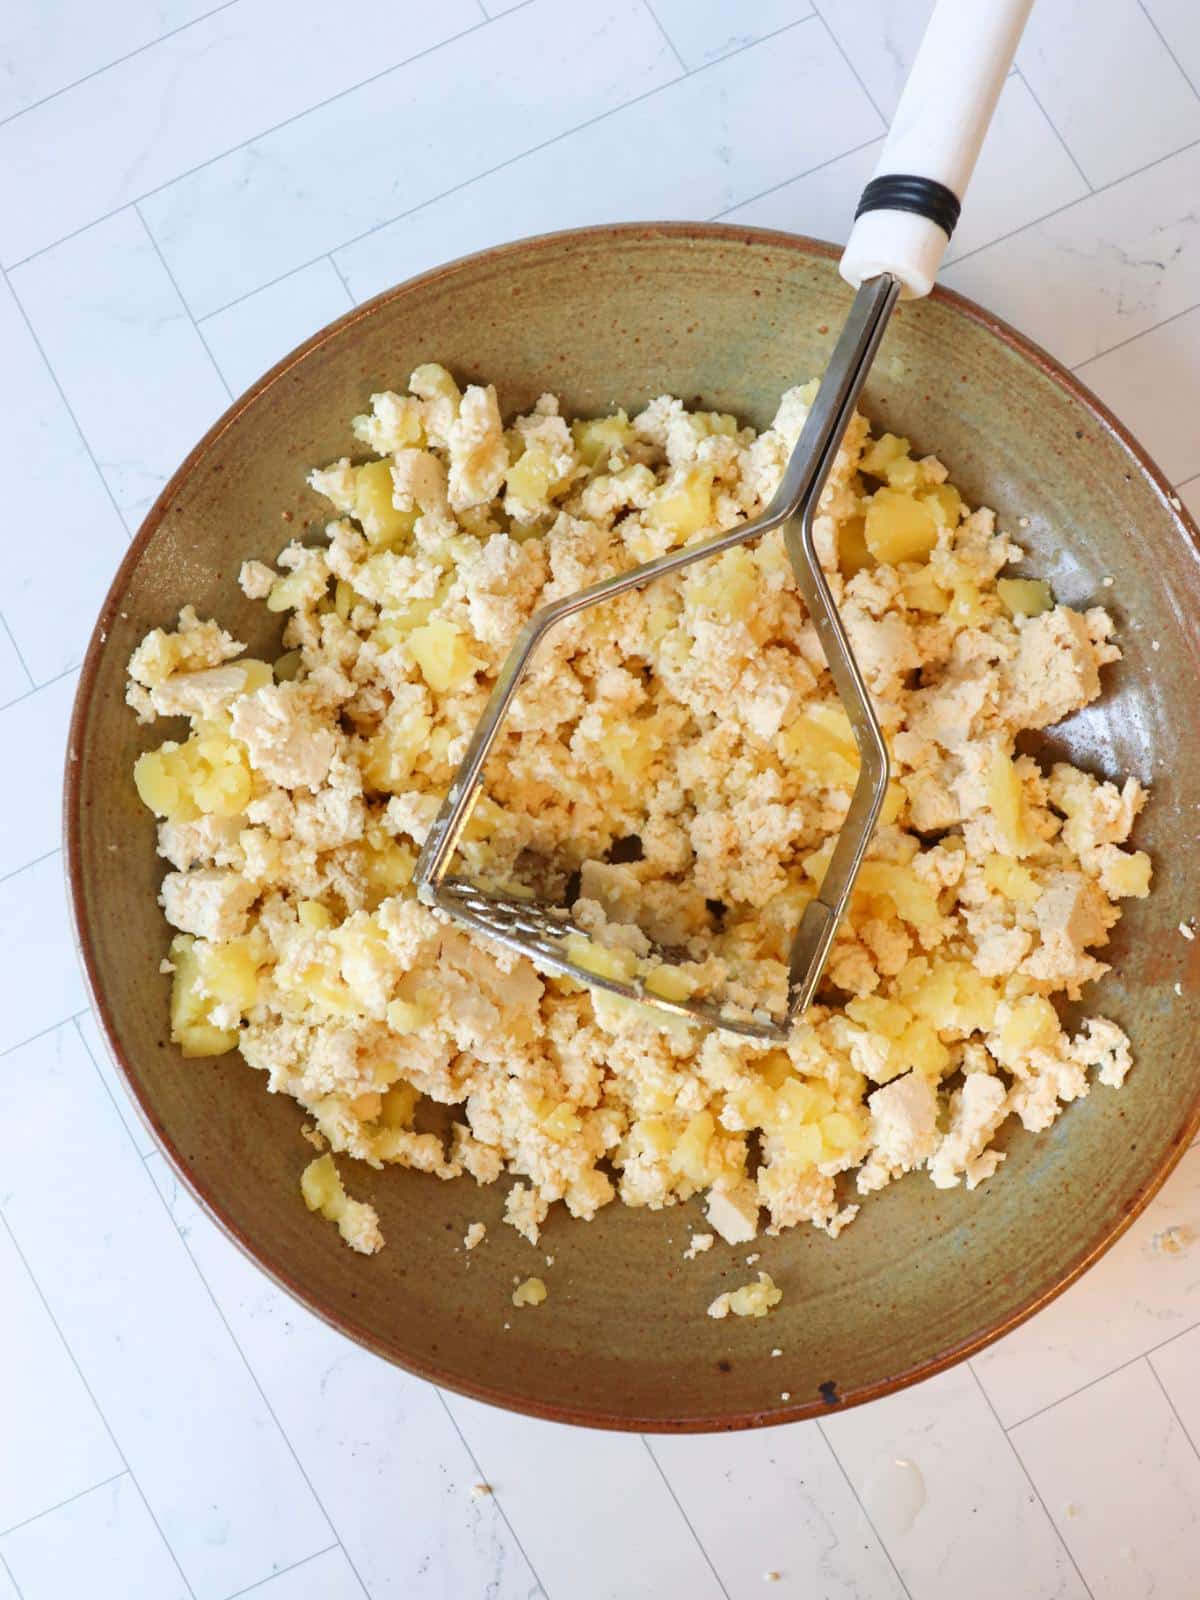 Boiled potato and crumbled tofu in a mixing bowl with a potato masher.